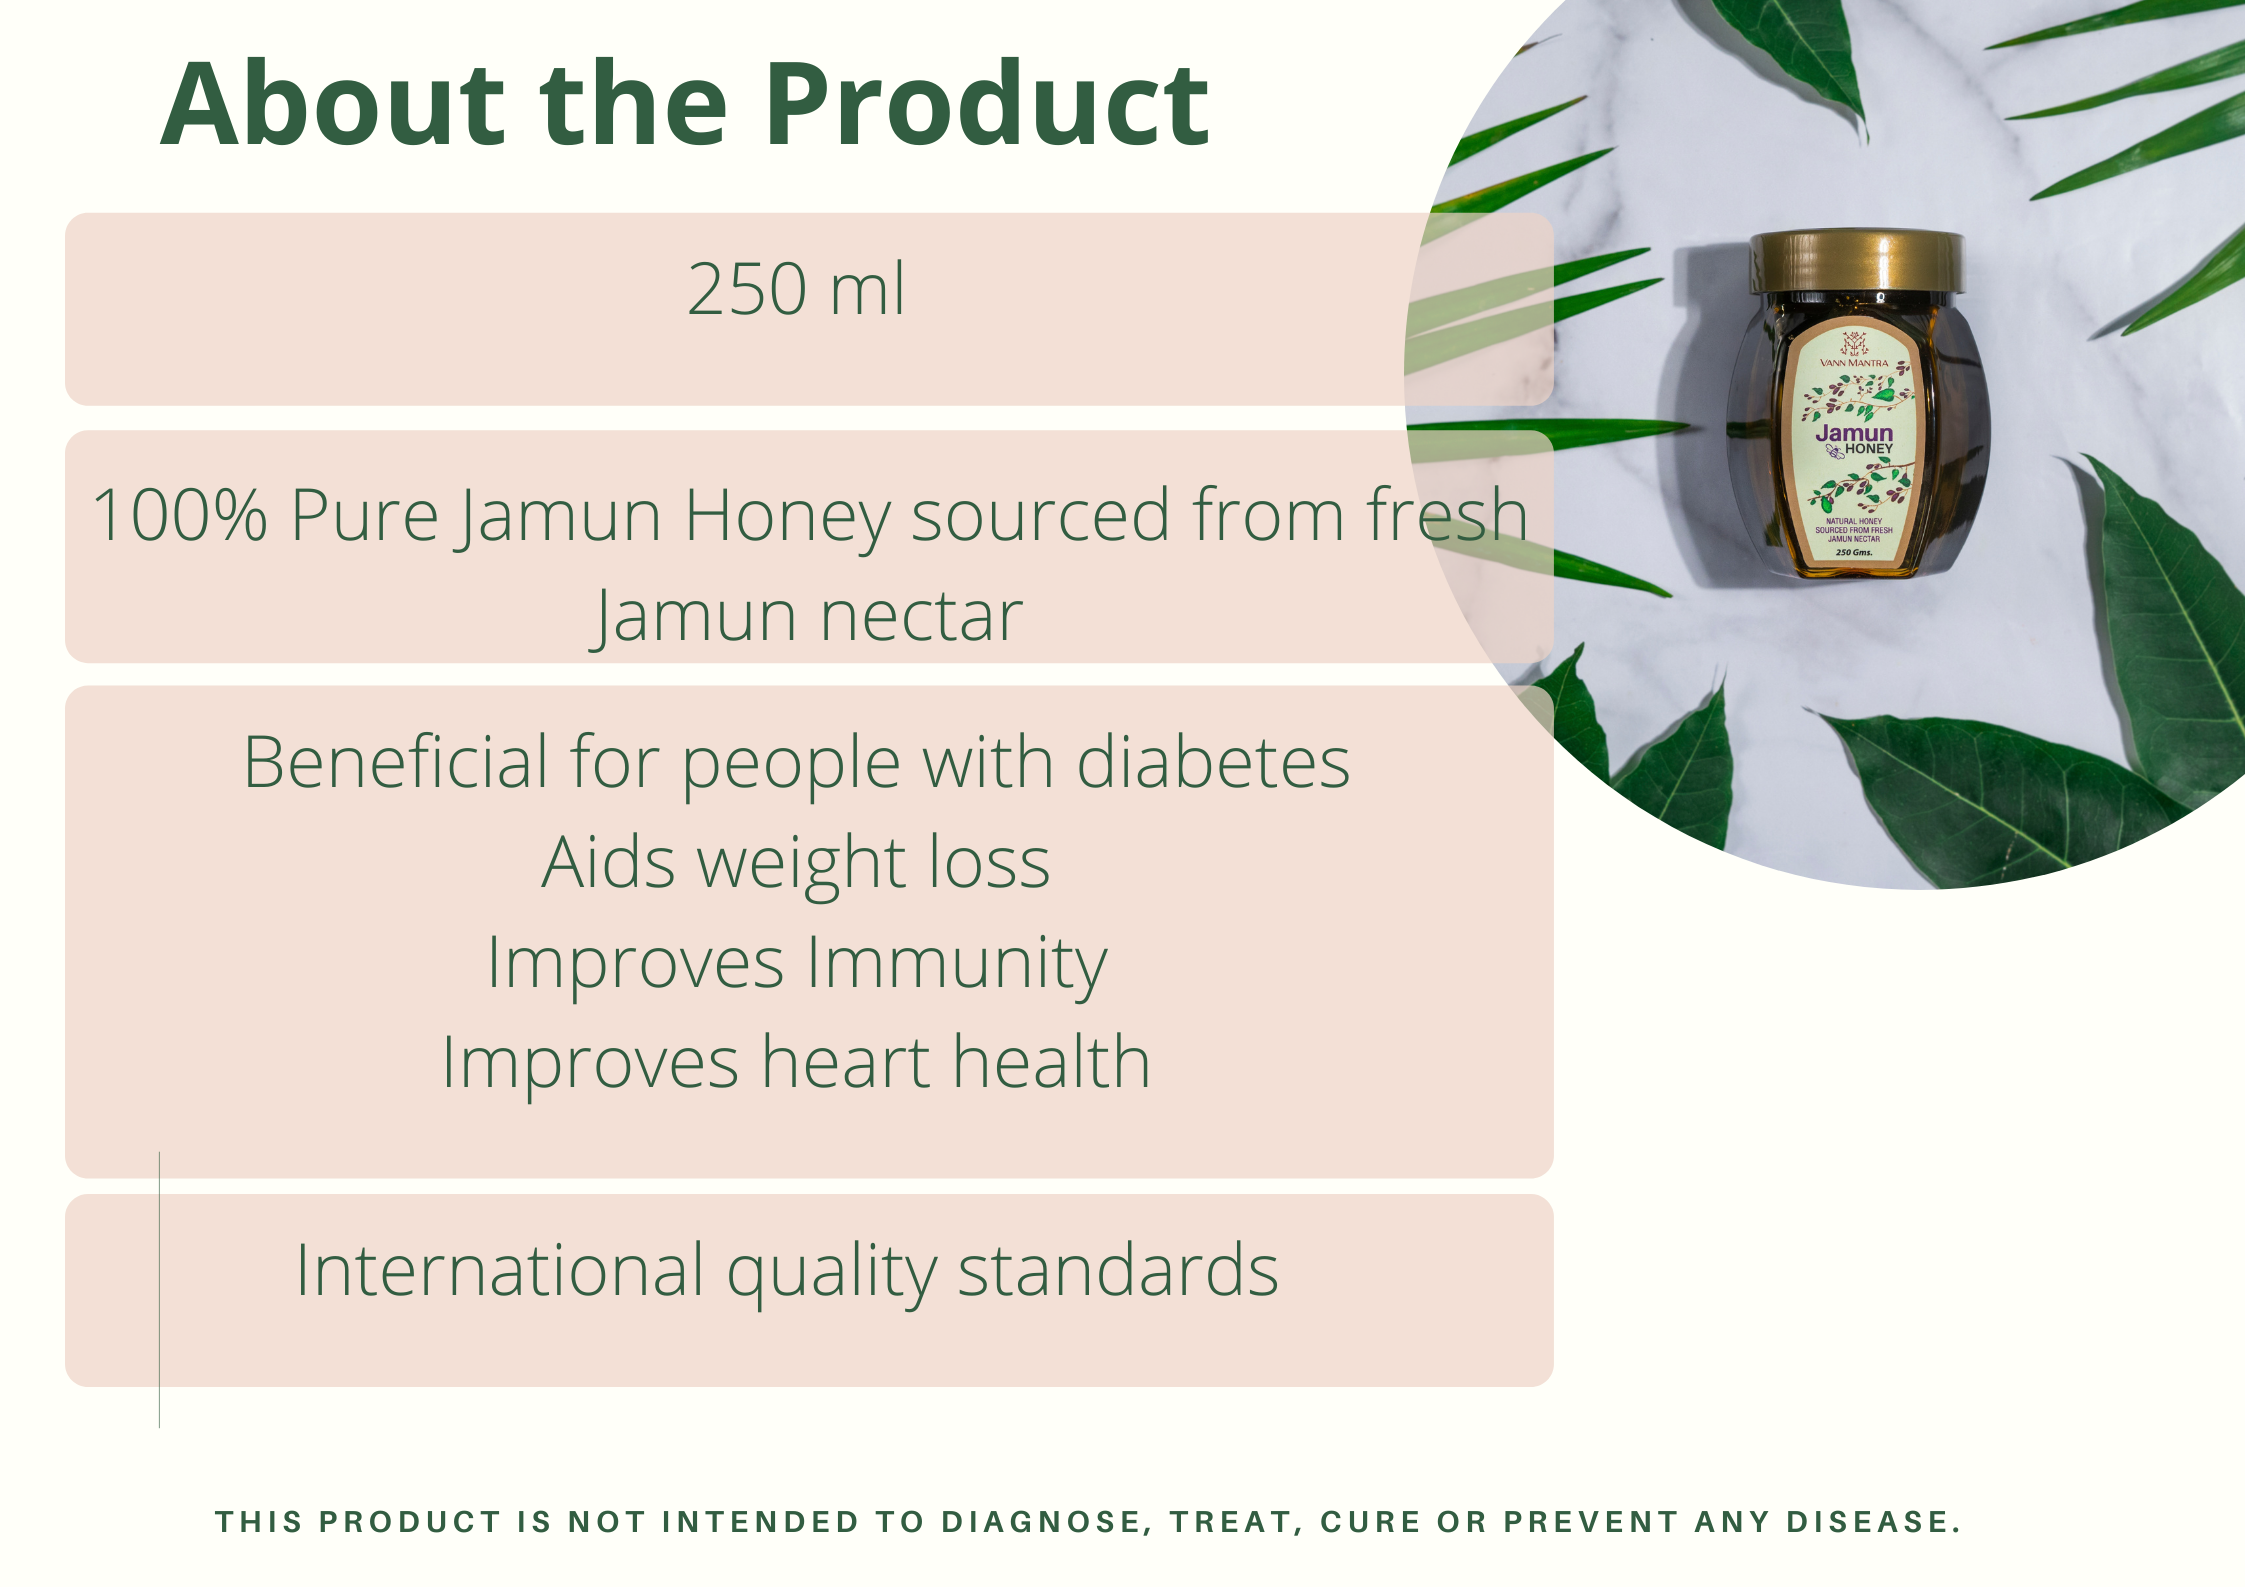 Infographic explaining the features and benefits of Jamun Honey.